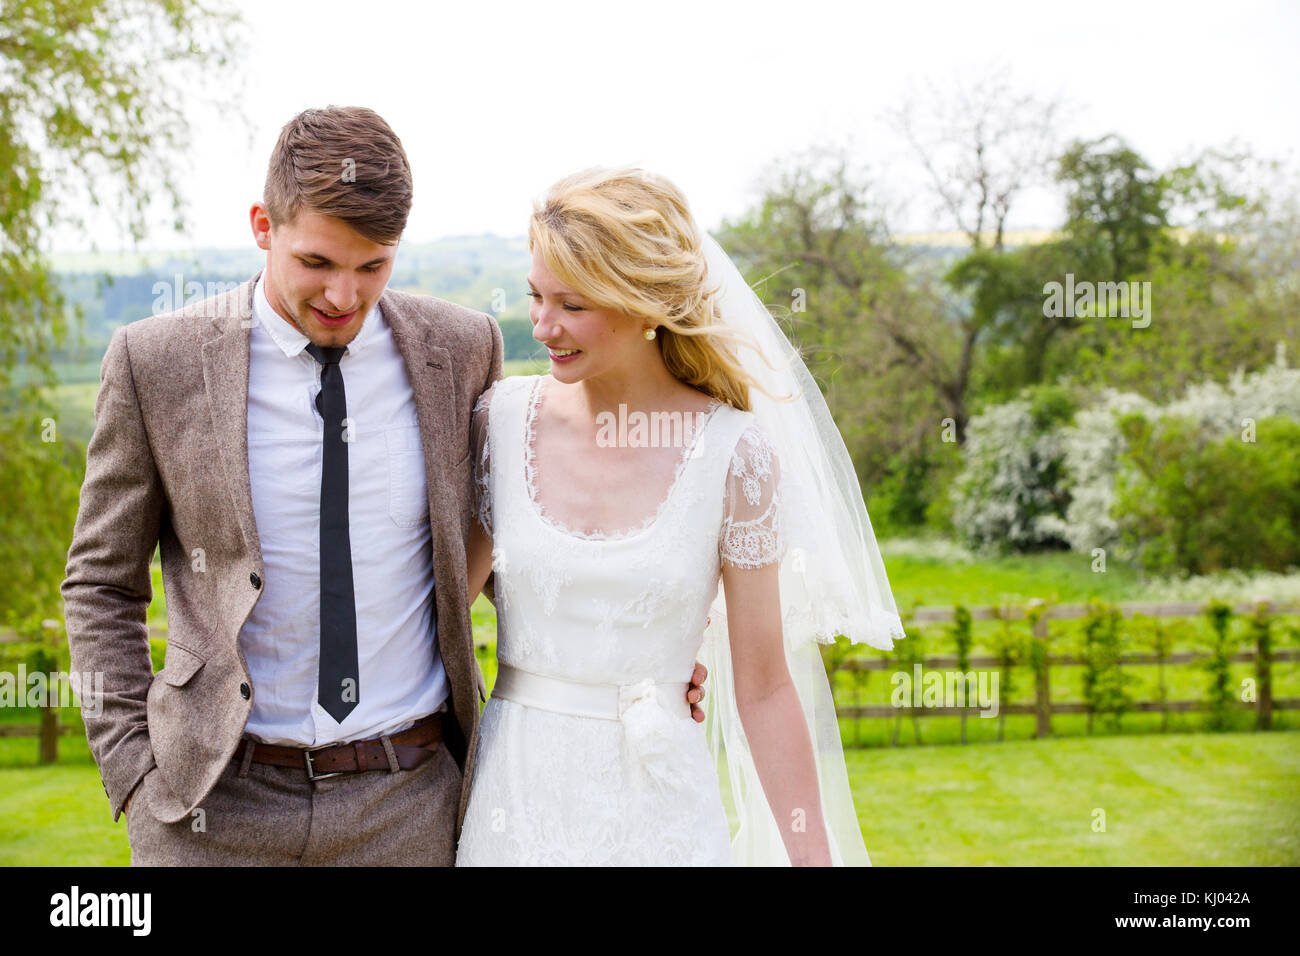 Newlywed couple strolling together in gardens Stock Photo